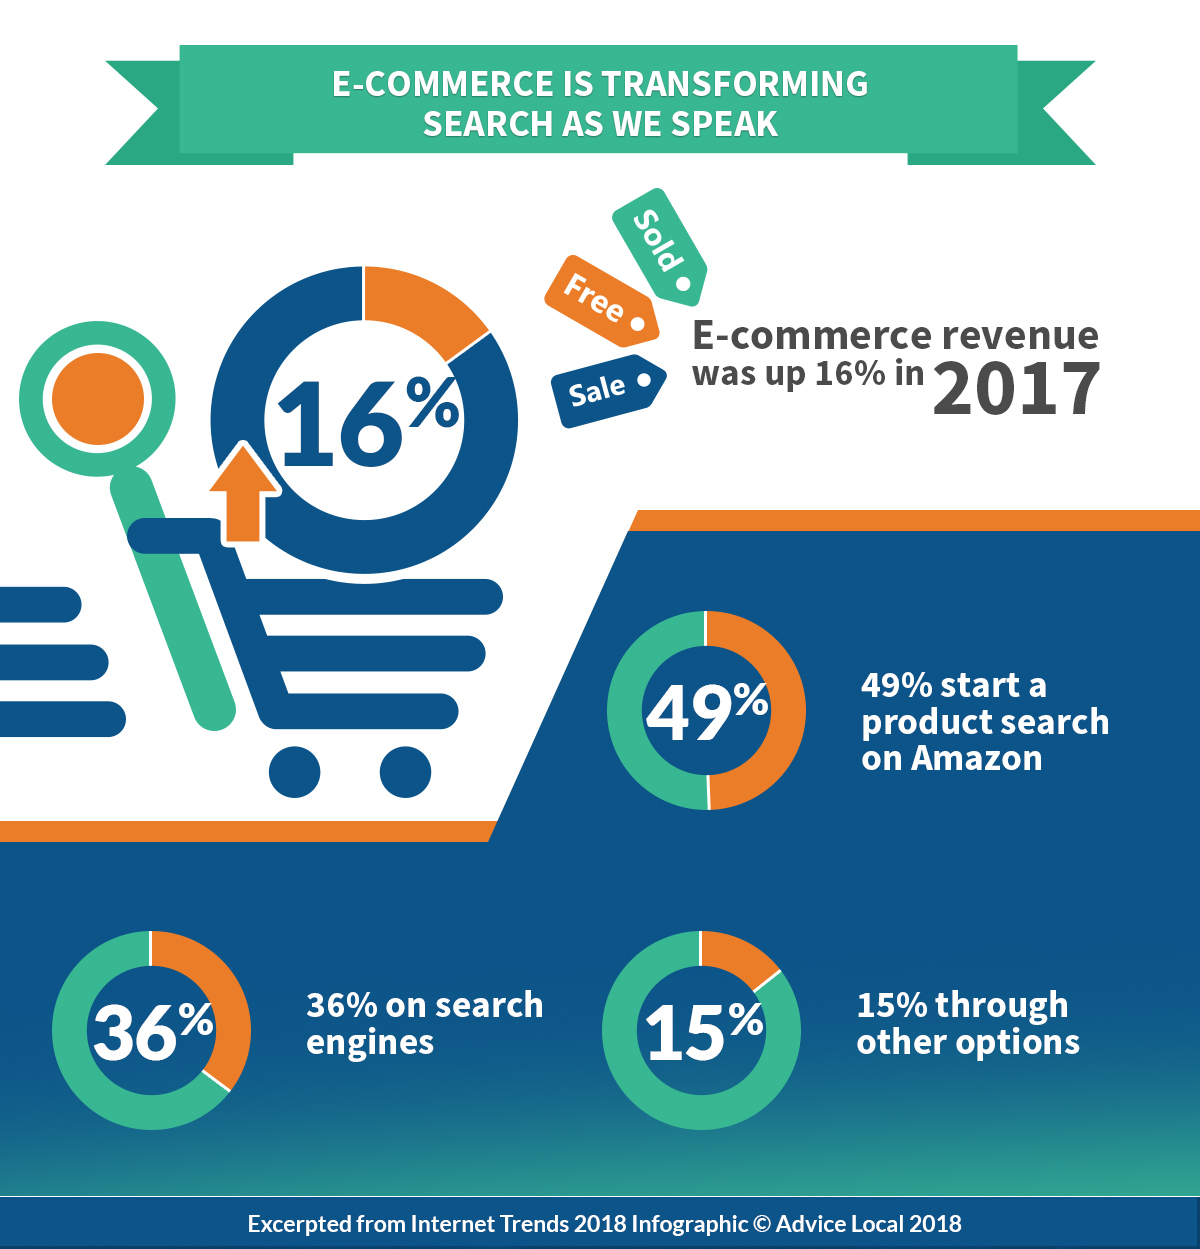 Internet Trends 2018 - Ecommerce Impacting Search